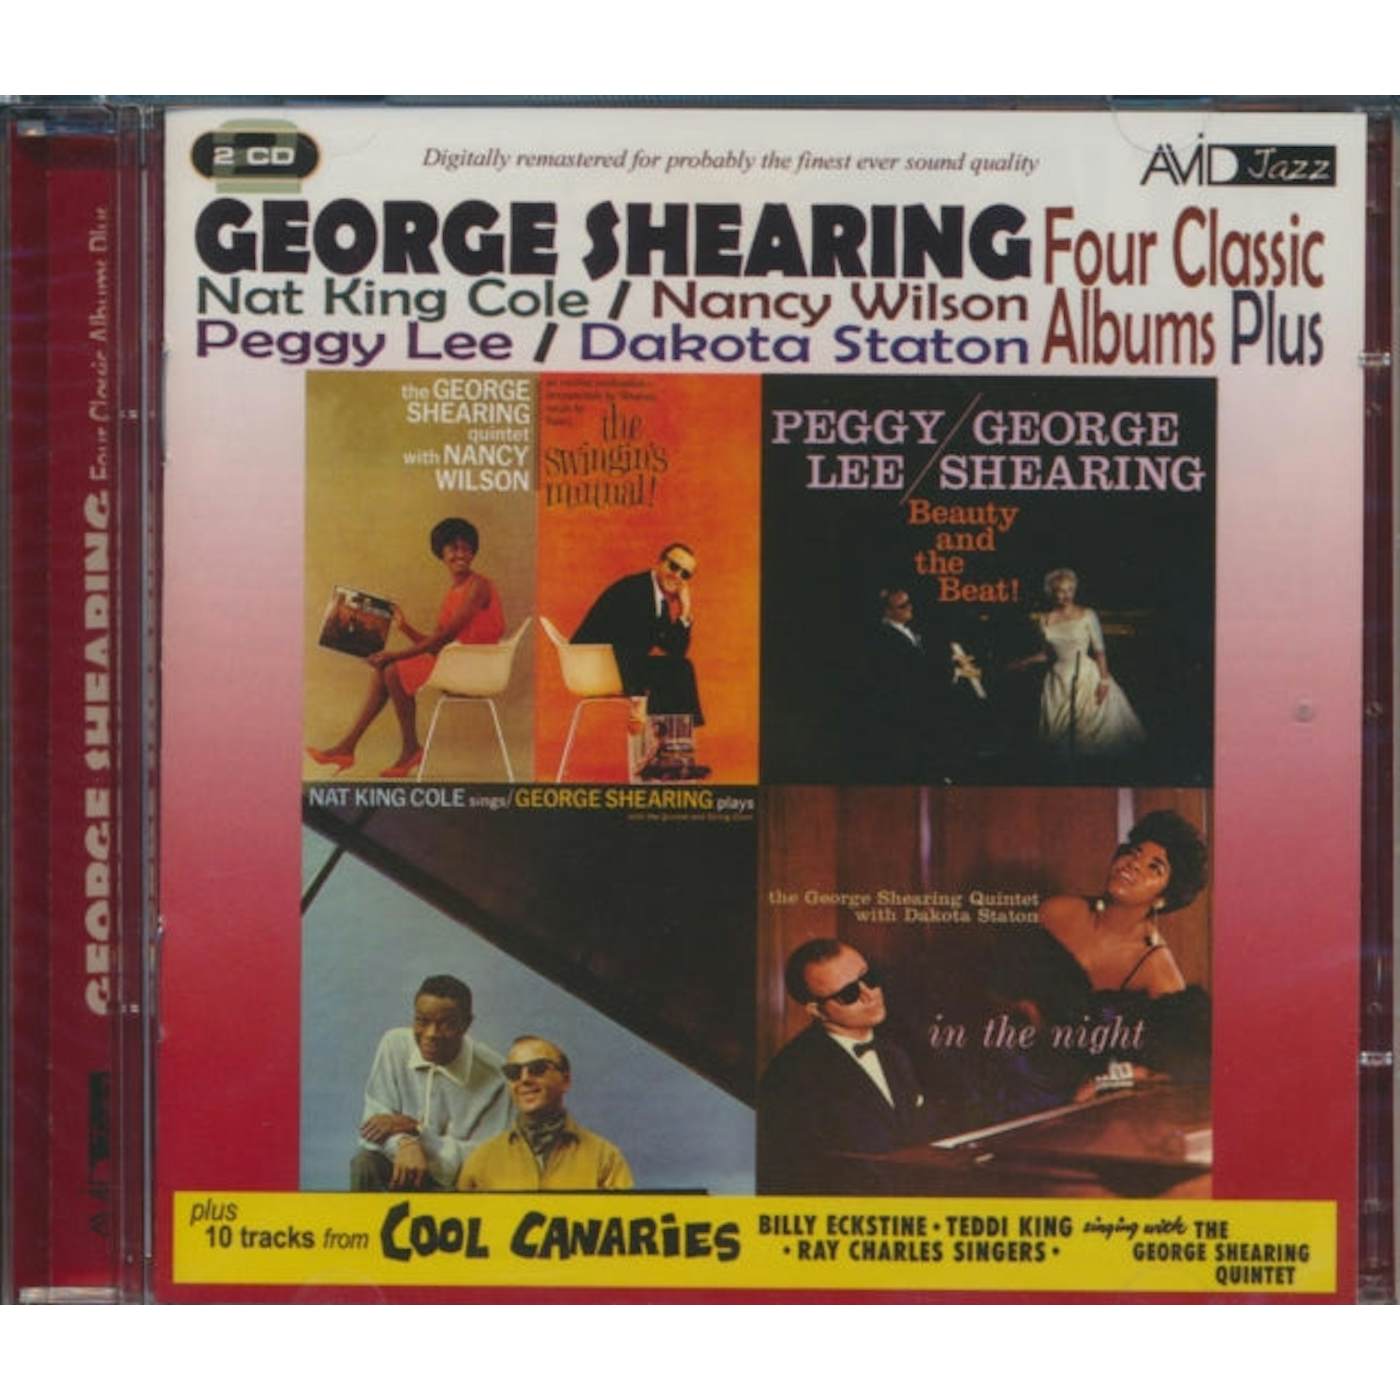 George Shearing CD - Four Classic Albums Plus (The Swingin's Mutual! / In The Night / Beauty And The Beat / Nat King Cole Sings - George Shearing Plays)